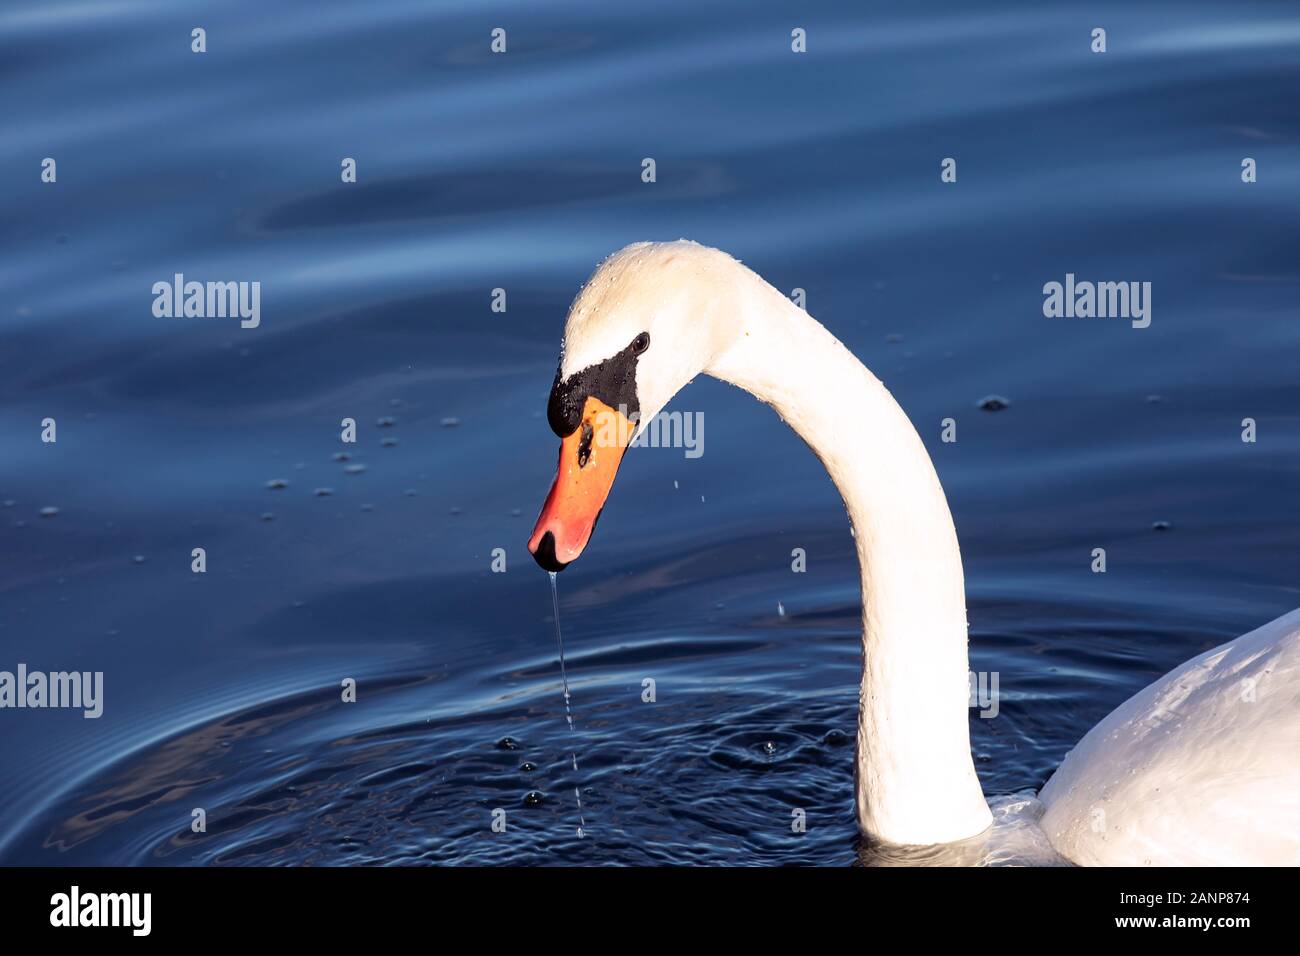 Swan in blue water close up of head. Droplets of water on head, water runs down the beak. Smooth dark background. Stock Photo